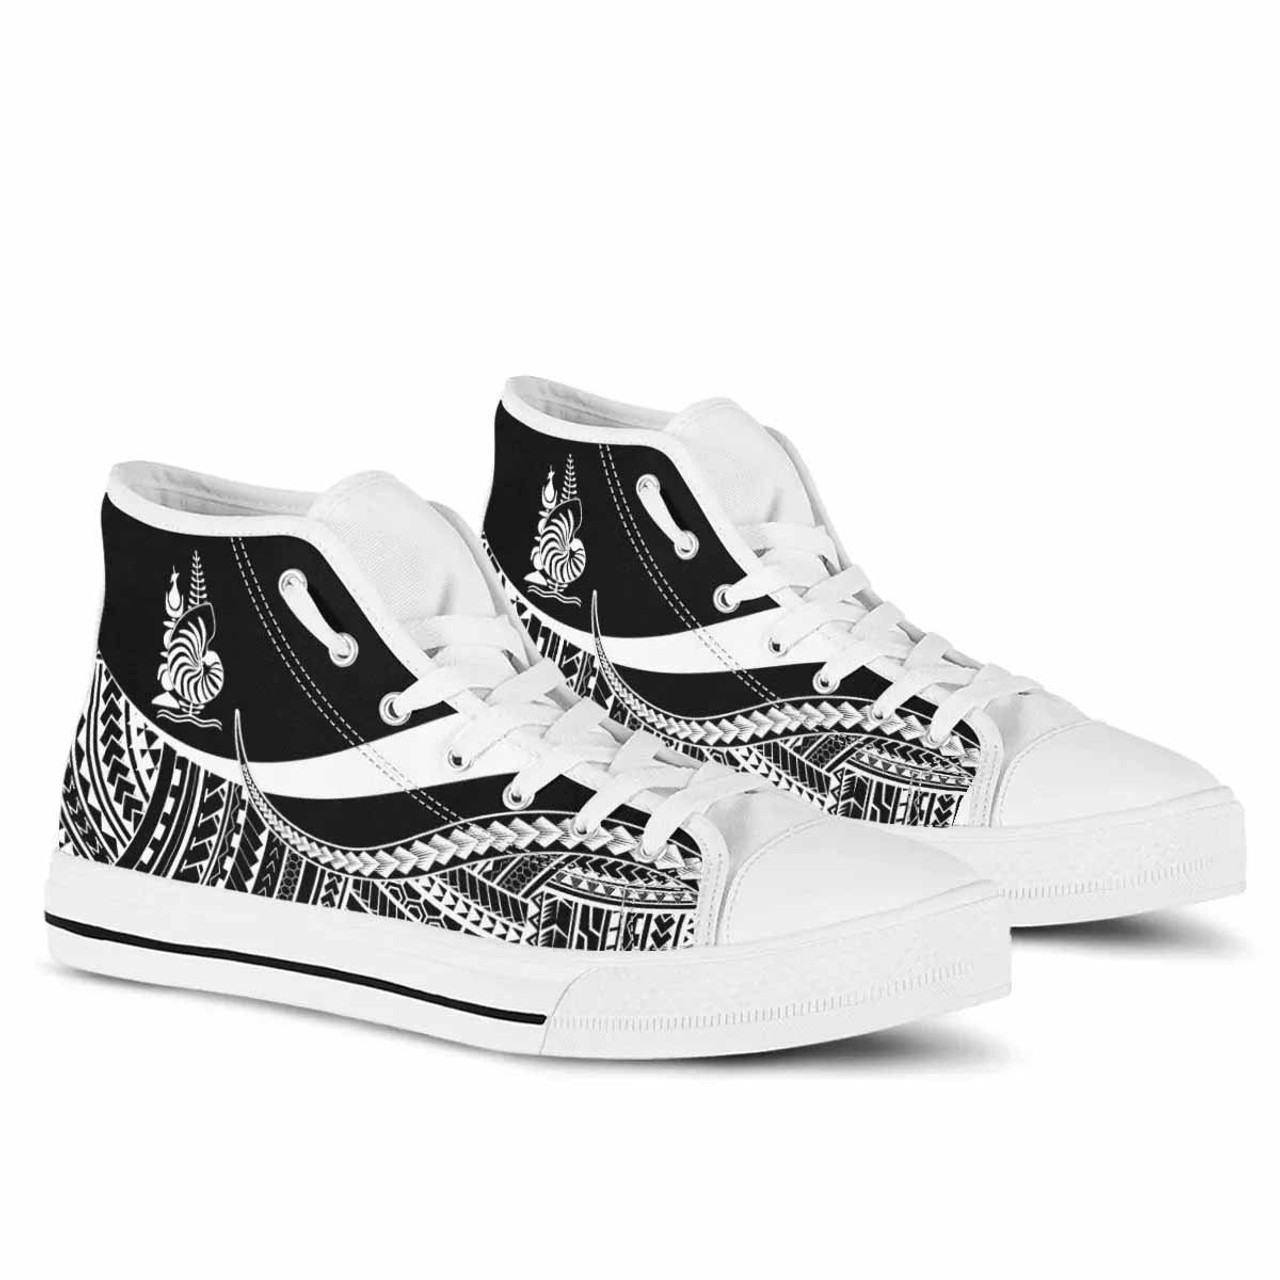 New Caledonia High Top Shoes White - Polynesian Tentacle Tribal Pattern Crest 6